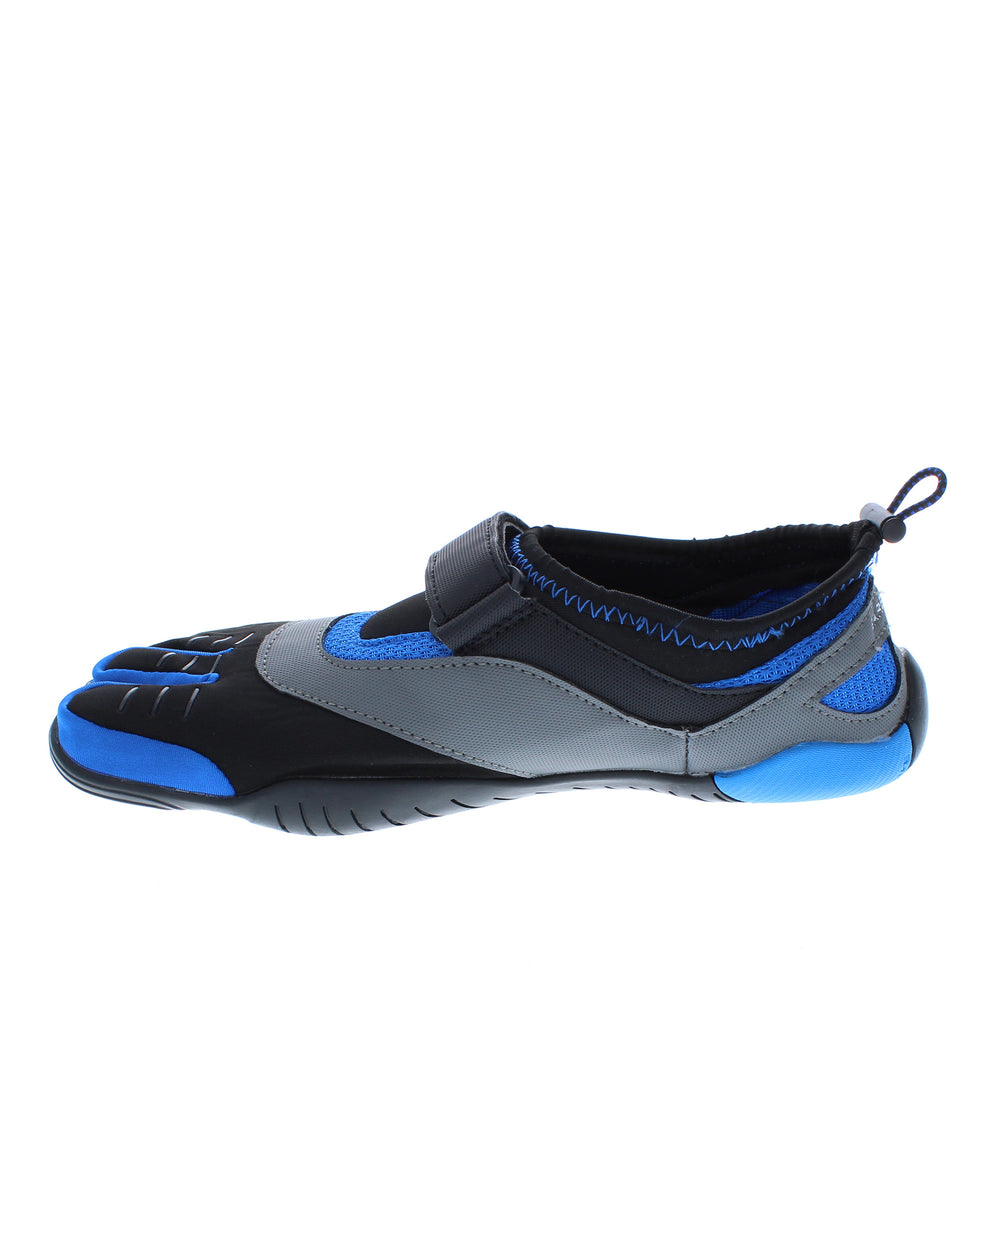 Men's 3T Barefoot Max Water Shoes - Black/Dazzling Blue